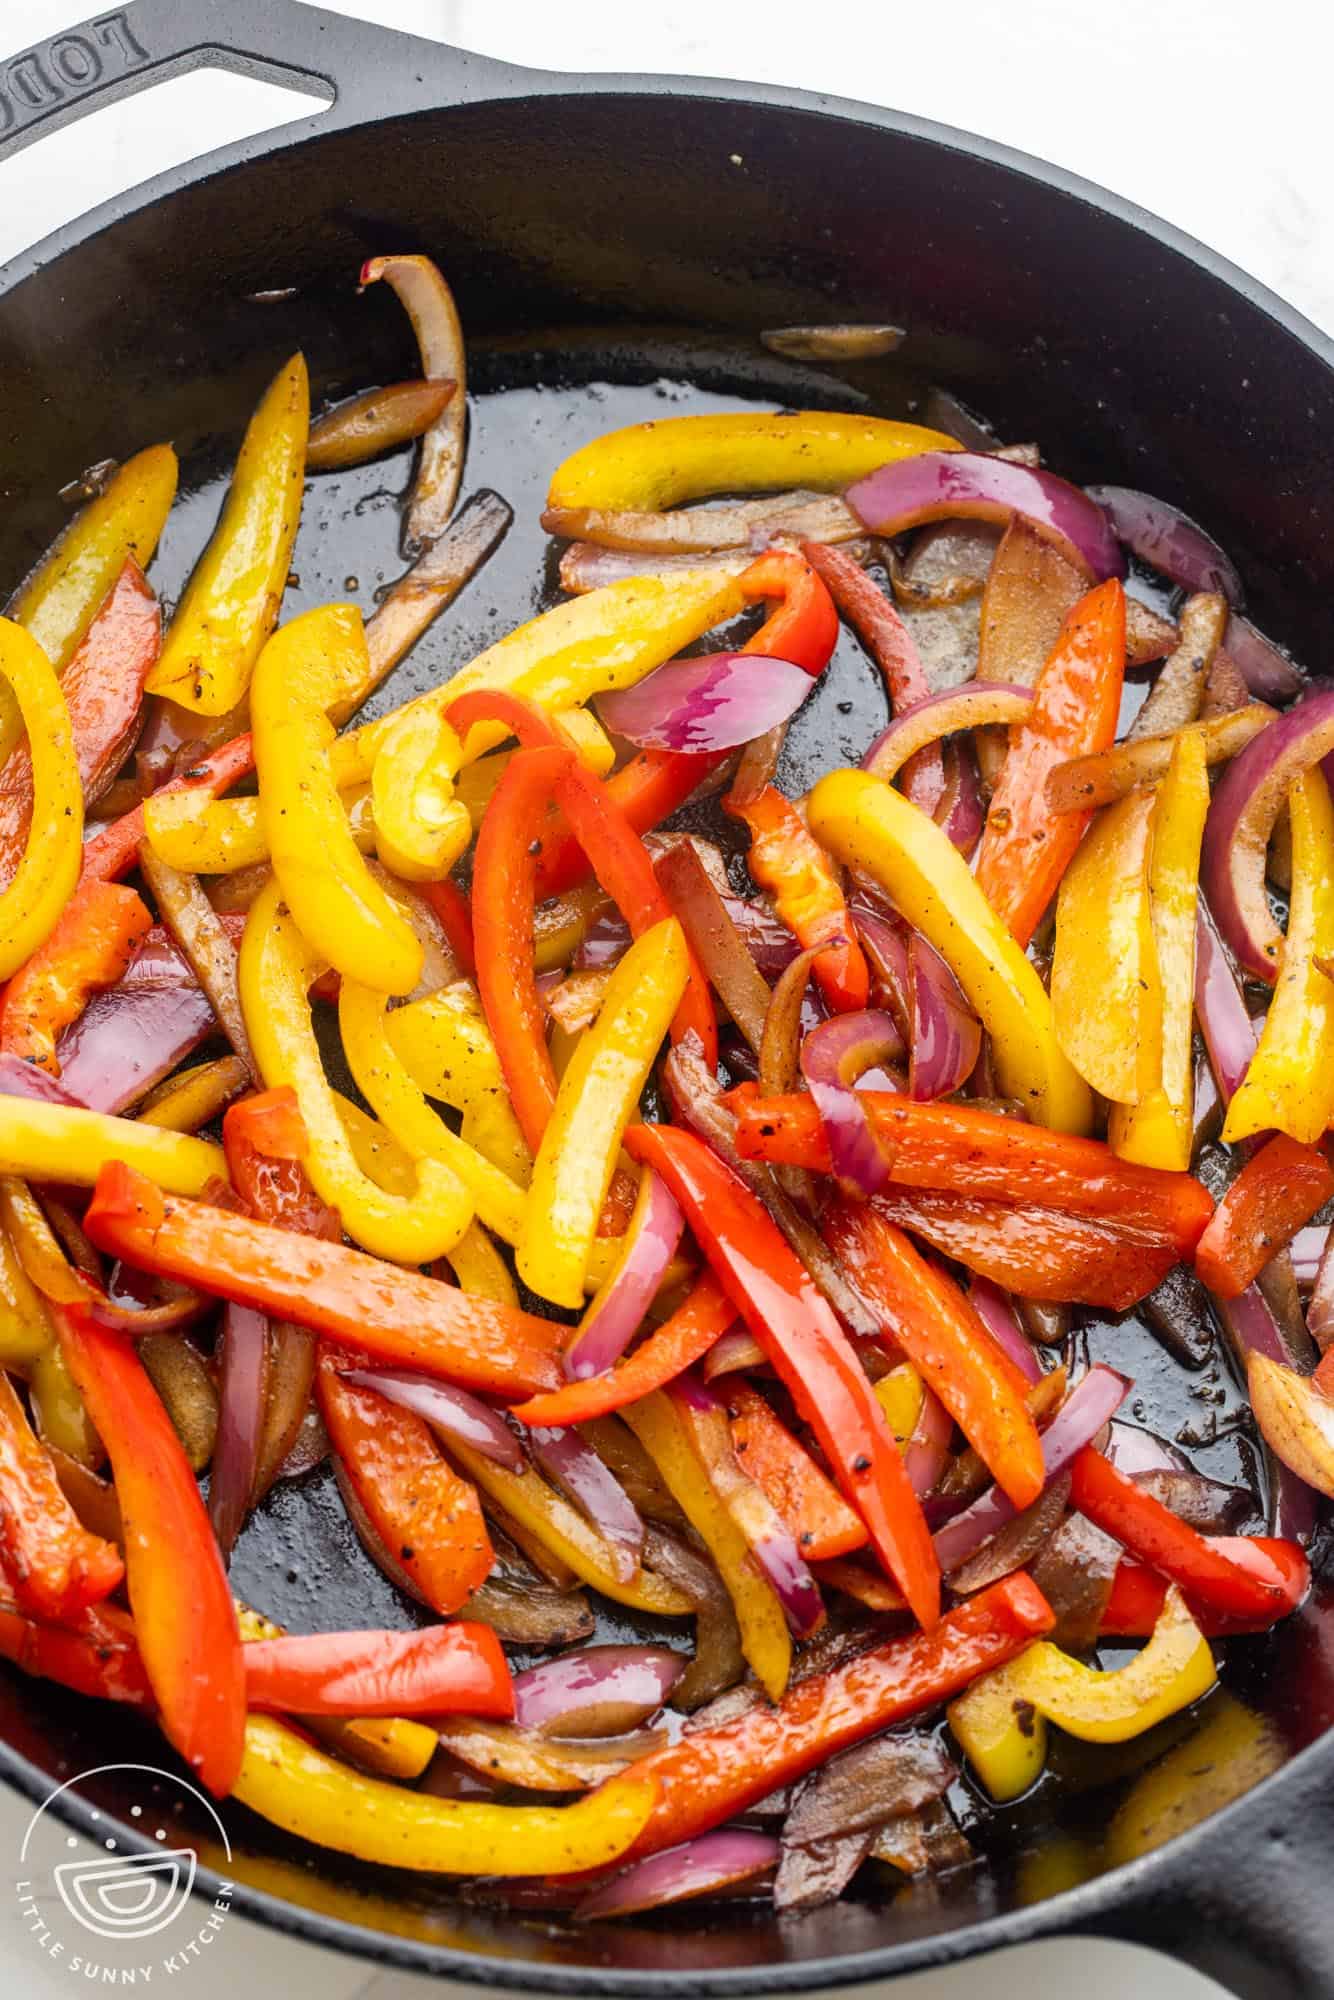 red and yellow bell peppers and onions, sauteed in a cast iron frying pan